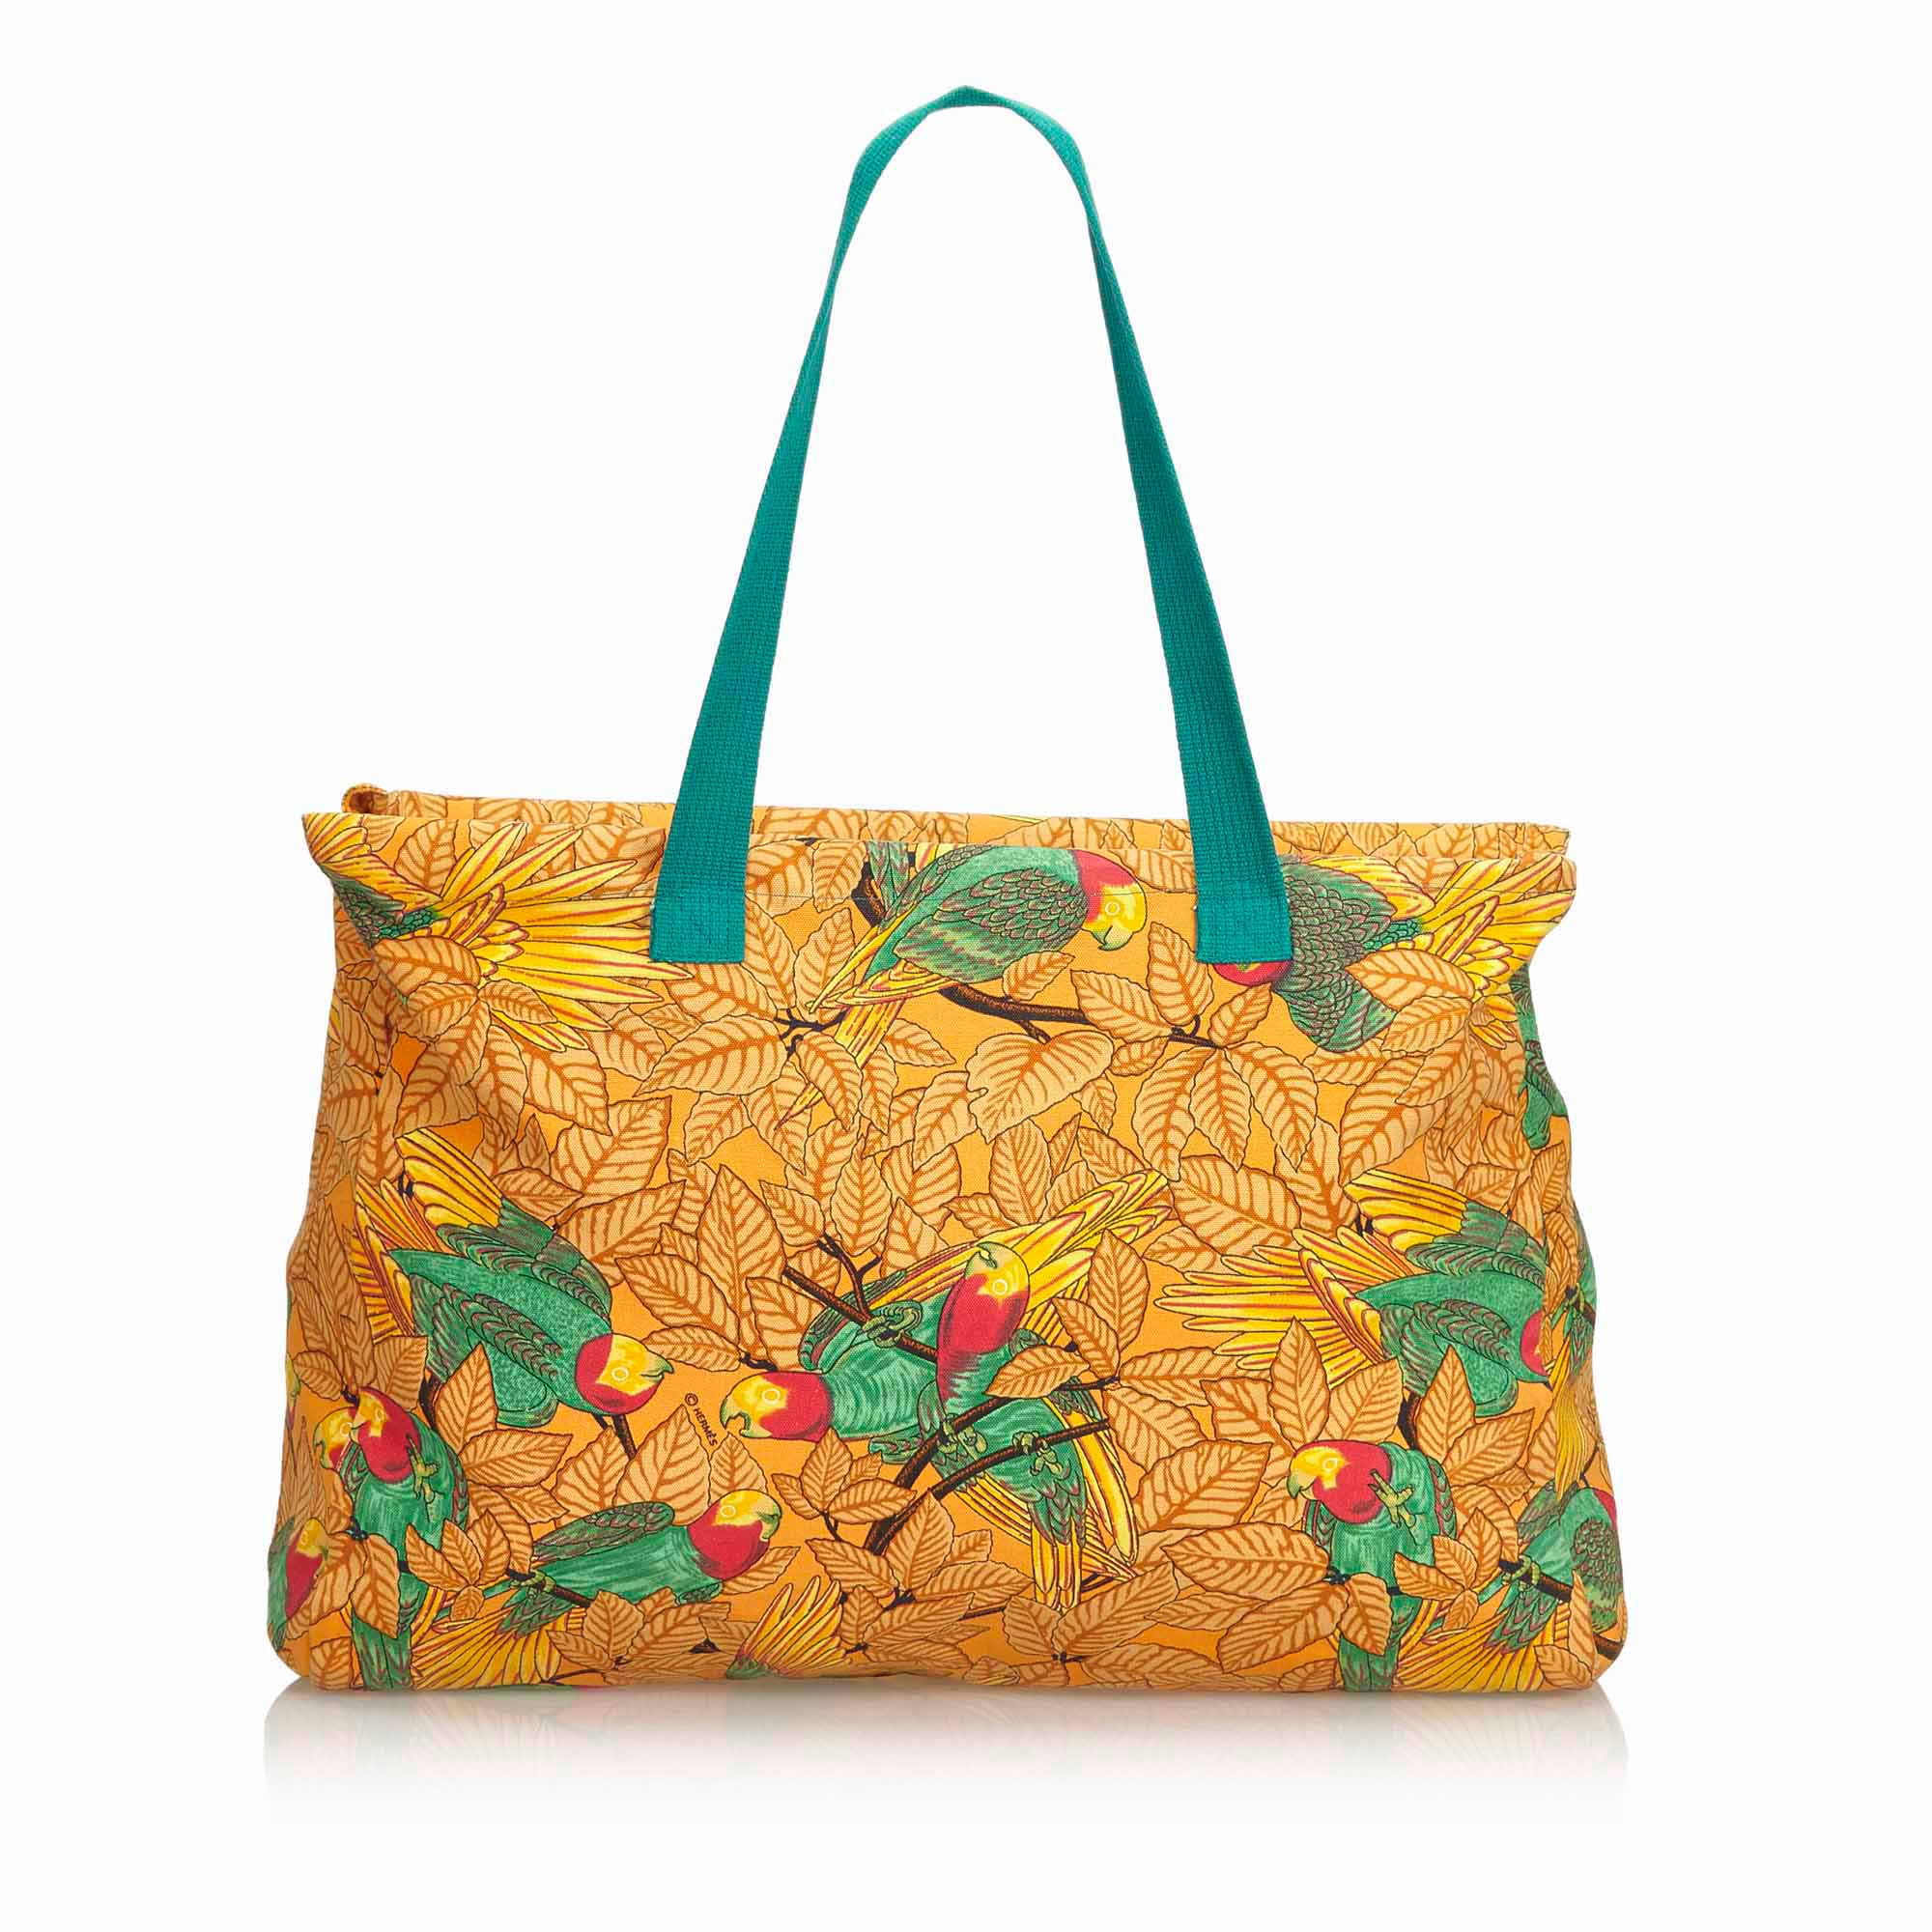 Hermes Printed Canvas Tote Bag, this tote bag features a printed canvas body, flat handles, and an - Image 3 of 10